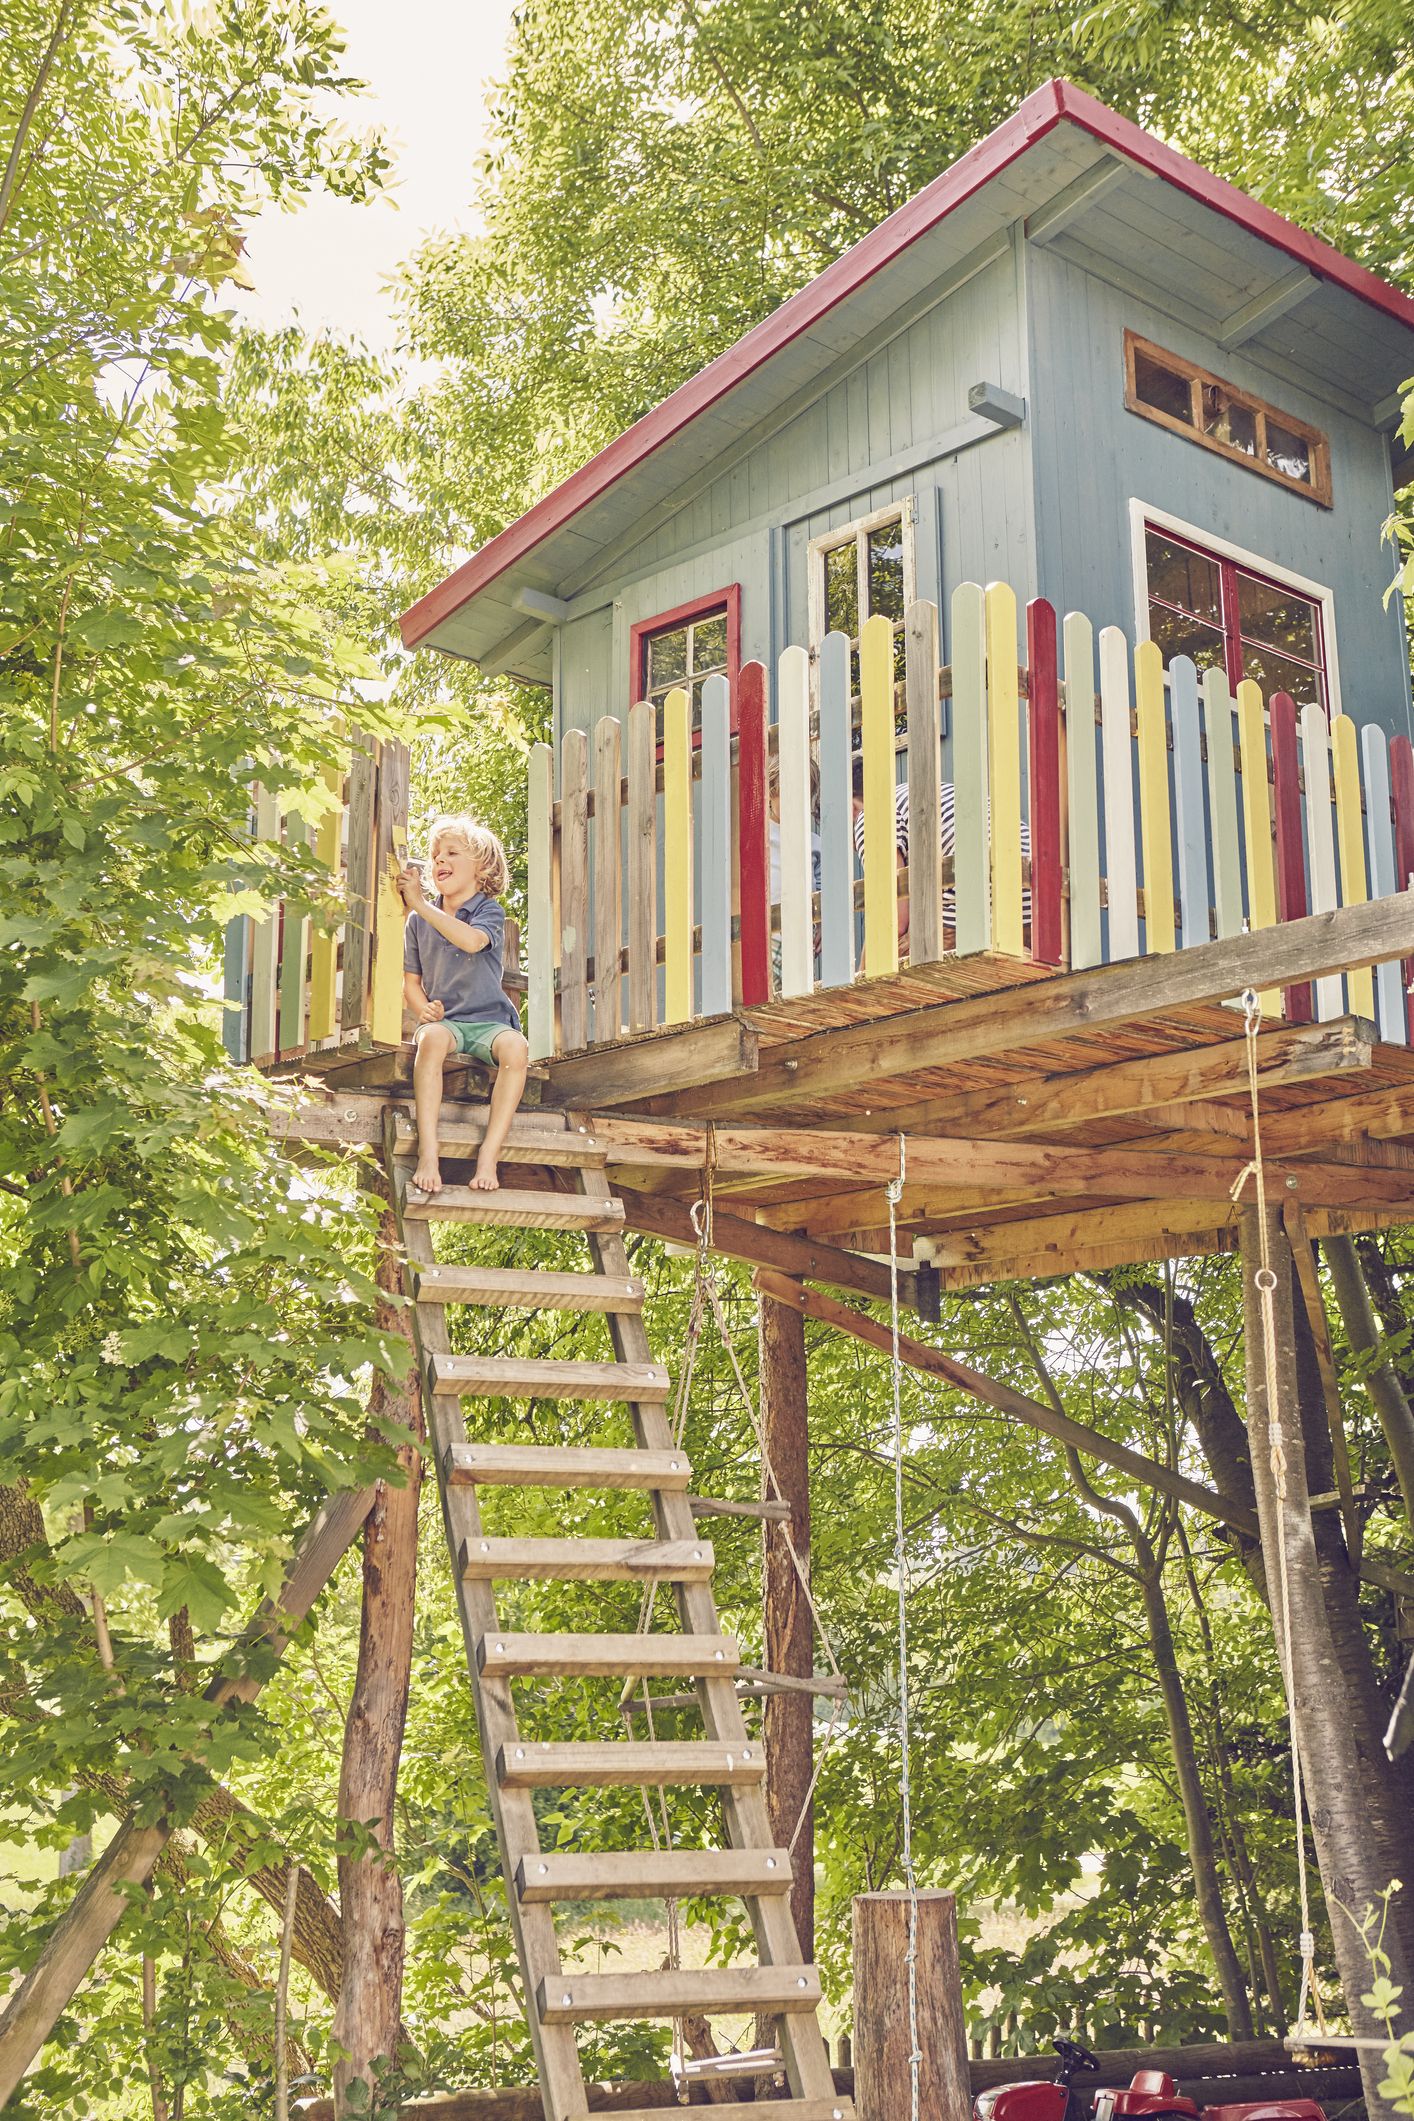 What It's Like to Stay in Tiny Home Tree House With 3 Floors + Slide